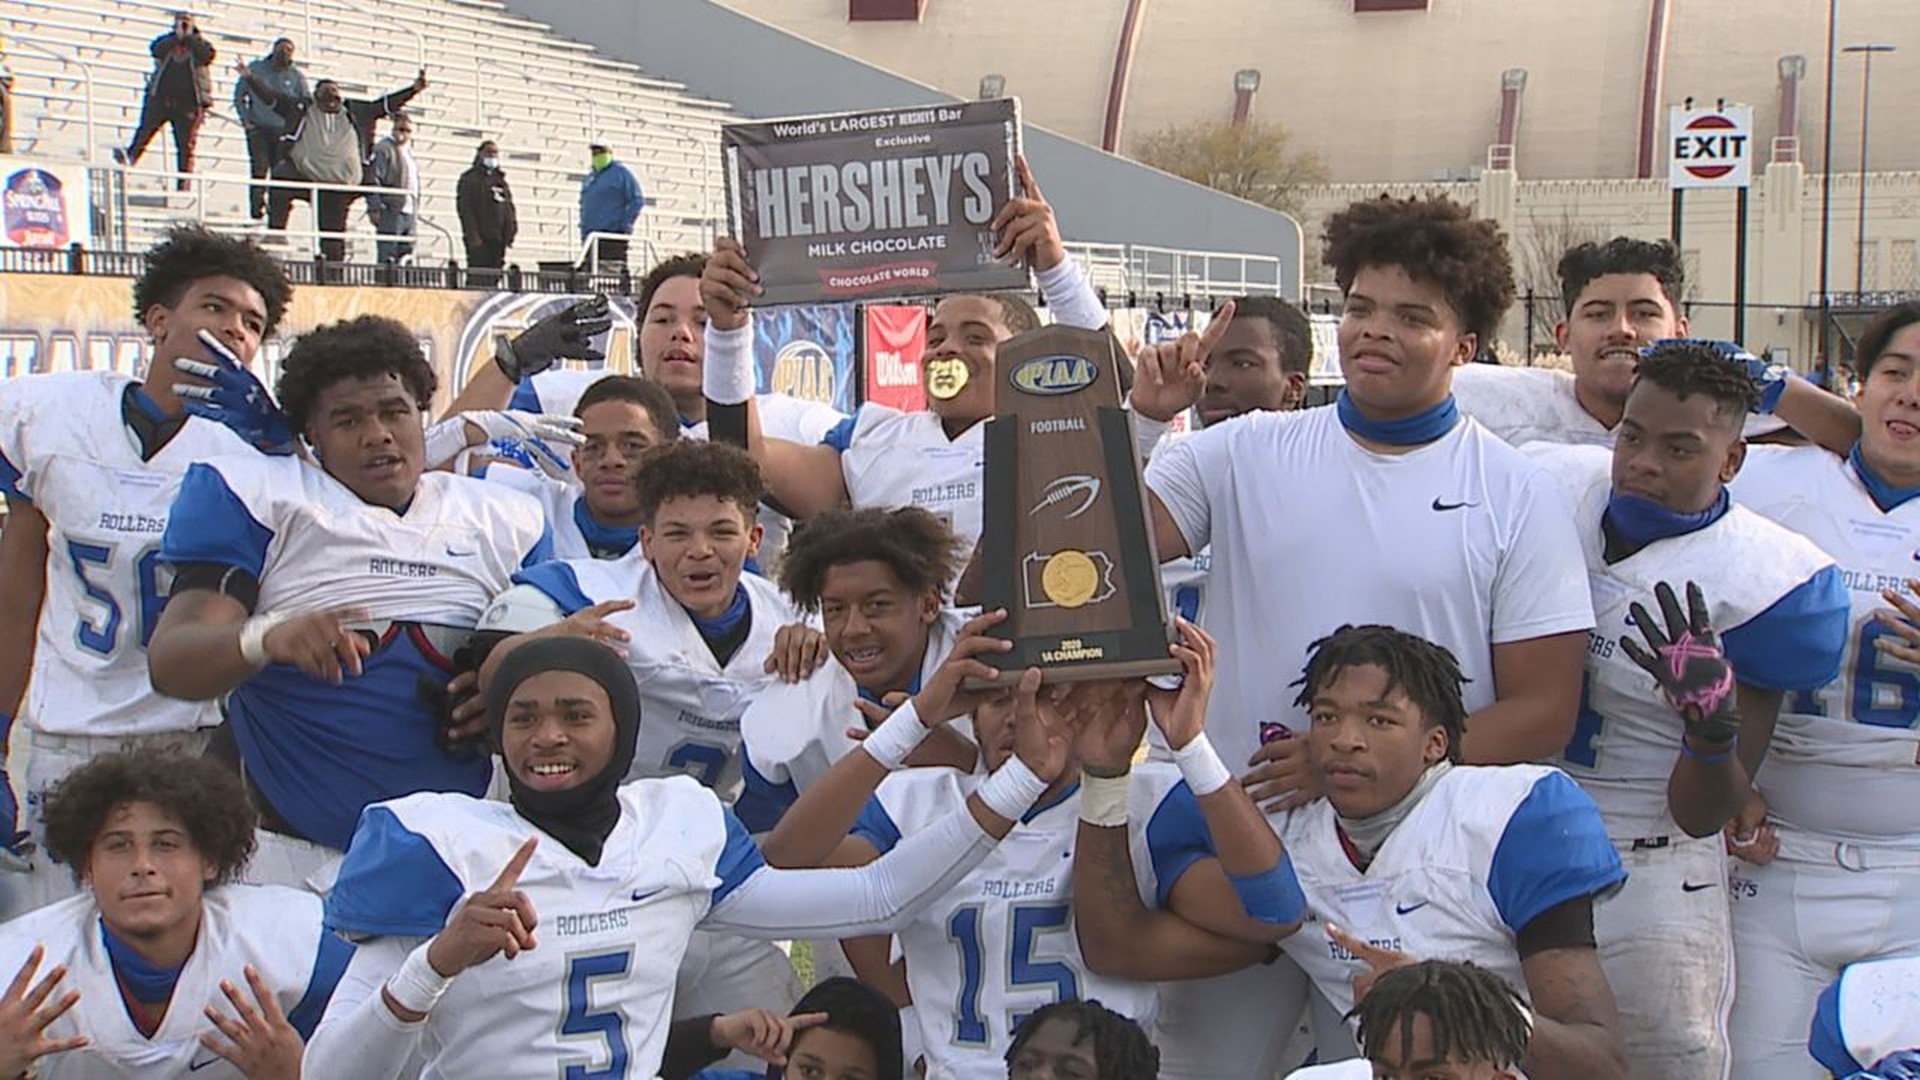 From warm-ups to the parade in Steelton, you can watch over ten minutes of highlights and celebrations from the Steamrollers big Friday.